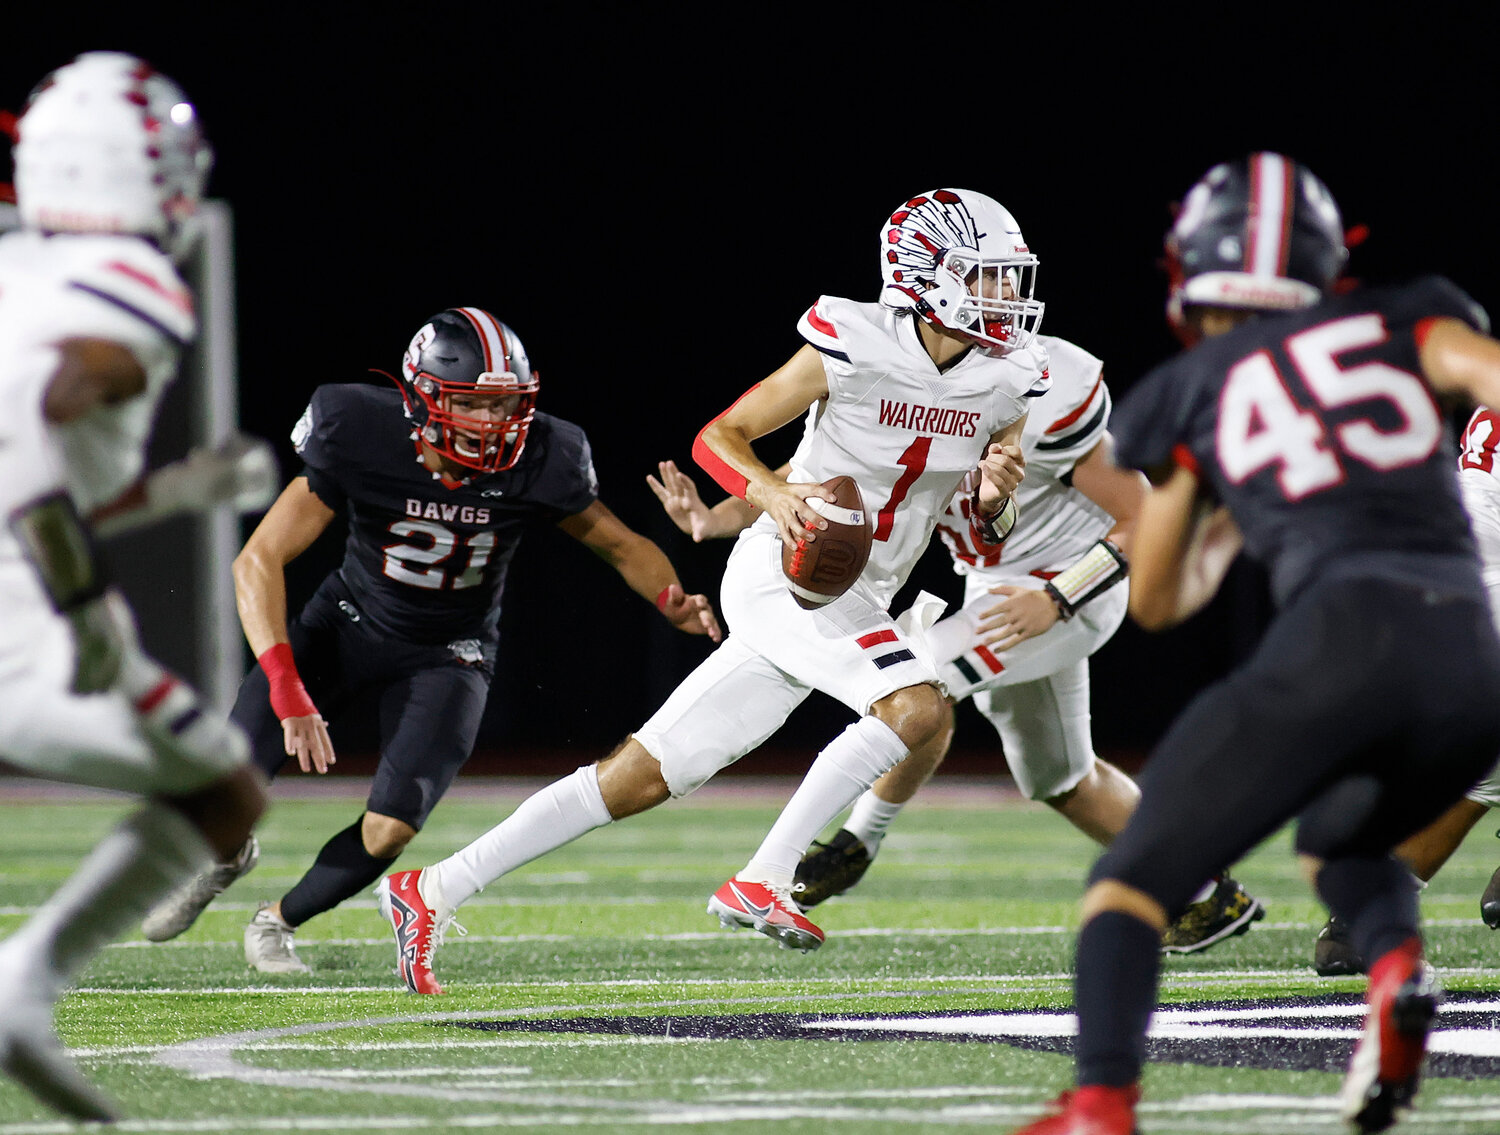 Warrenton's Charlie Blondin (1) carries the ball during a game against Fort Zumwalt South, Friday, Aug. 25, 2023, at Fort Zumwalt South High School in St. Peters, Mo.